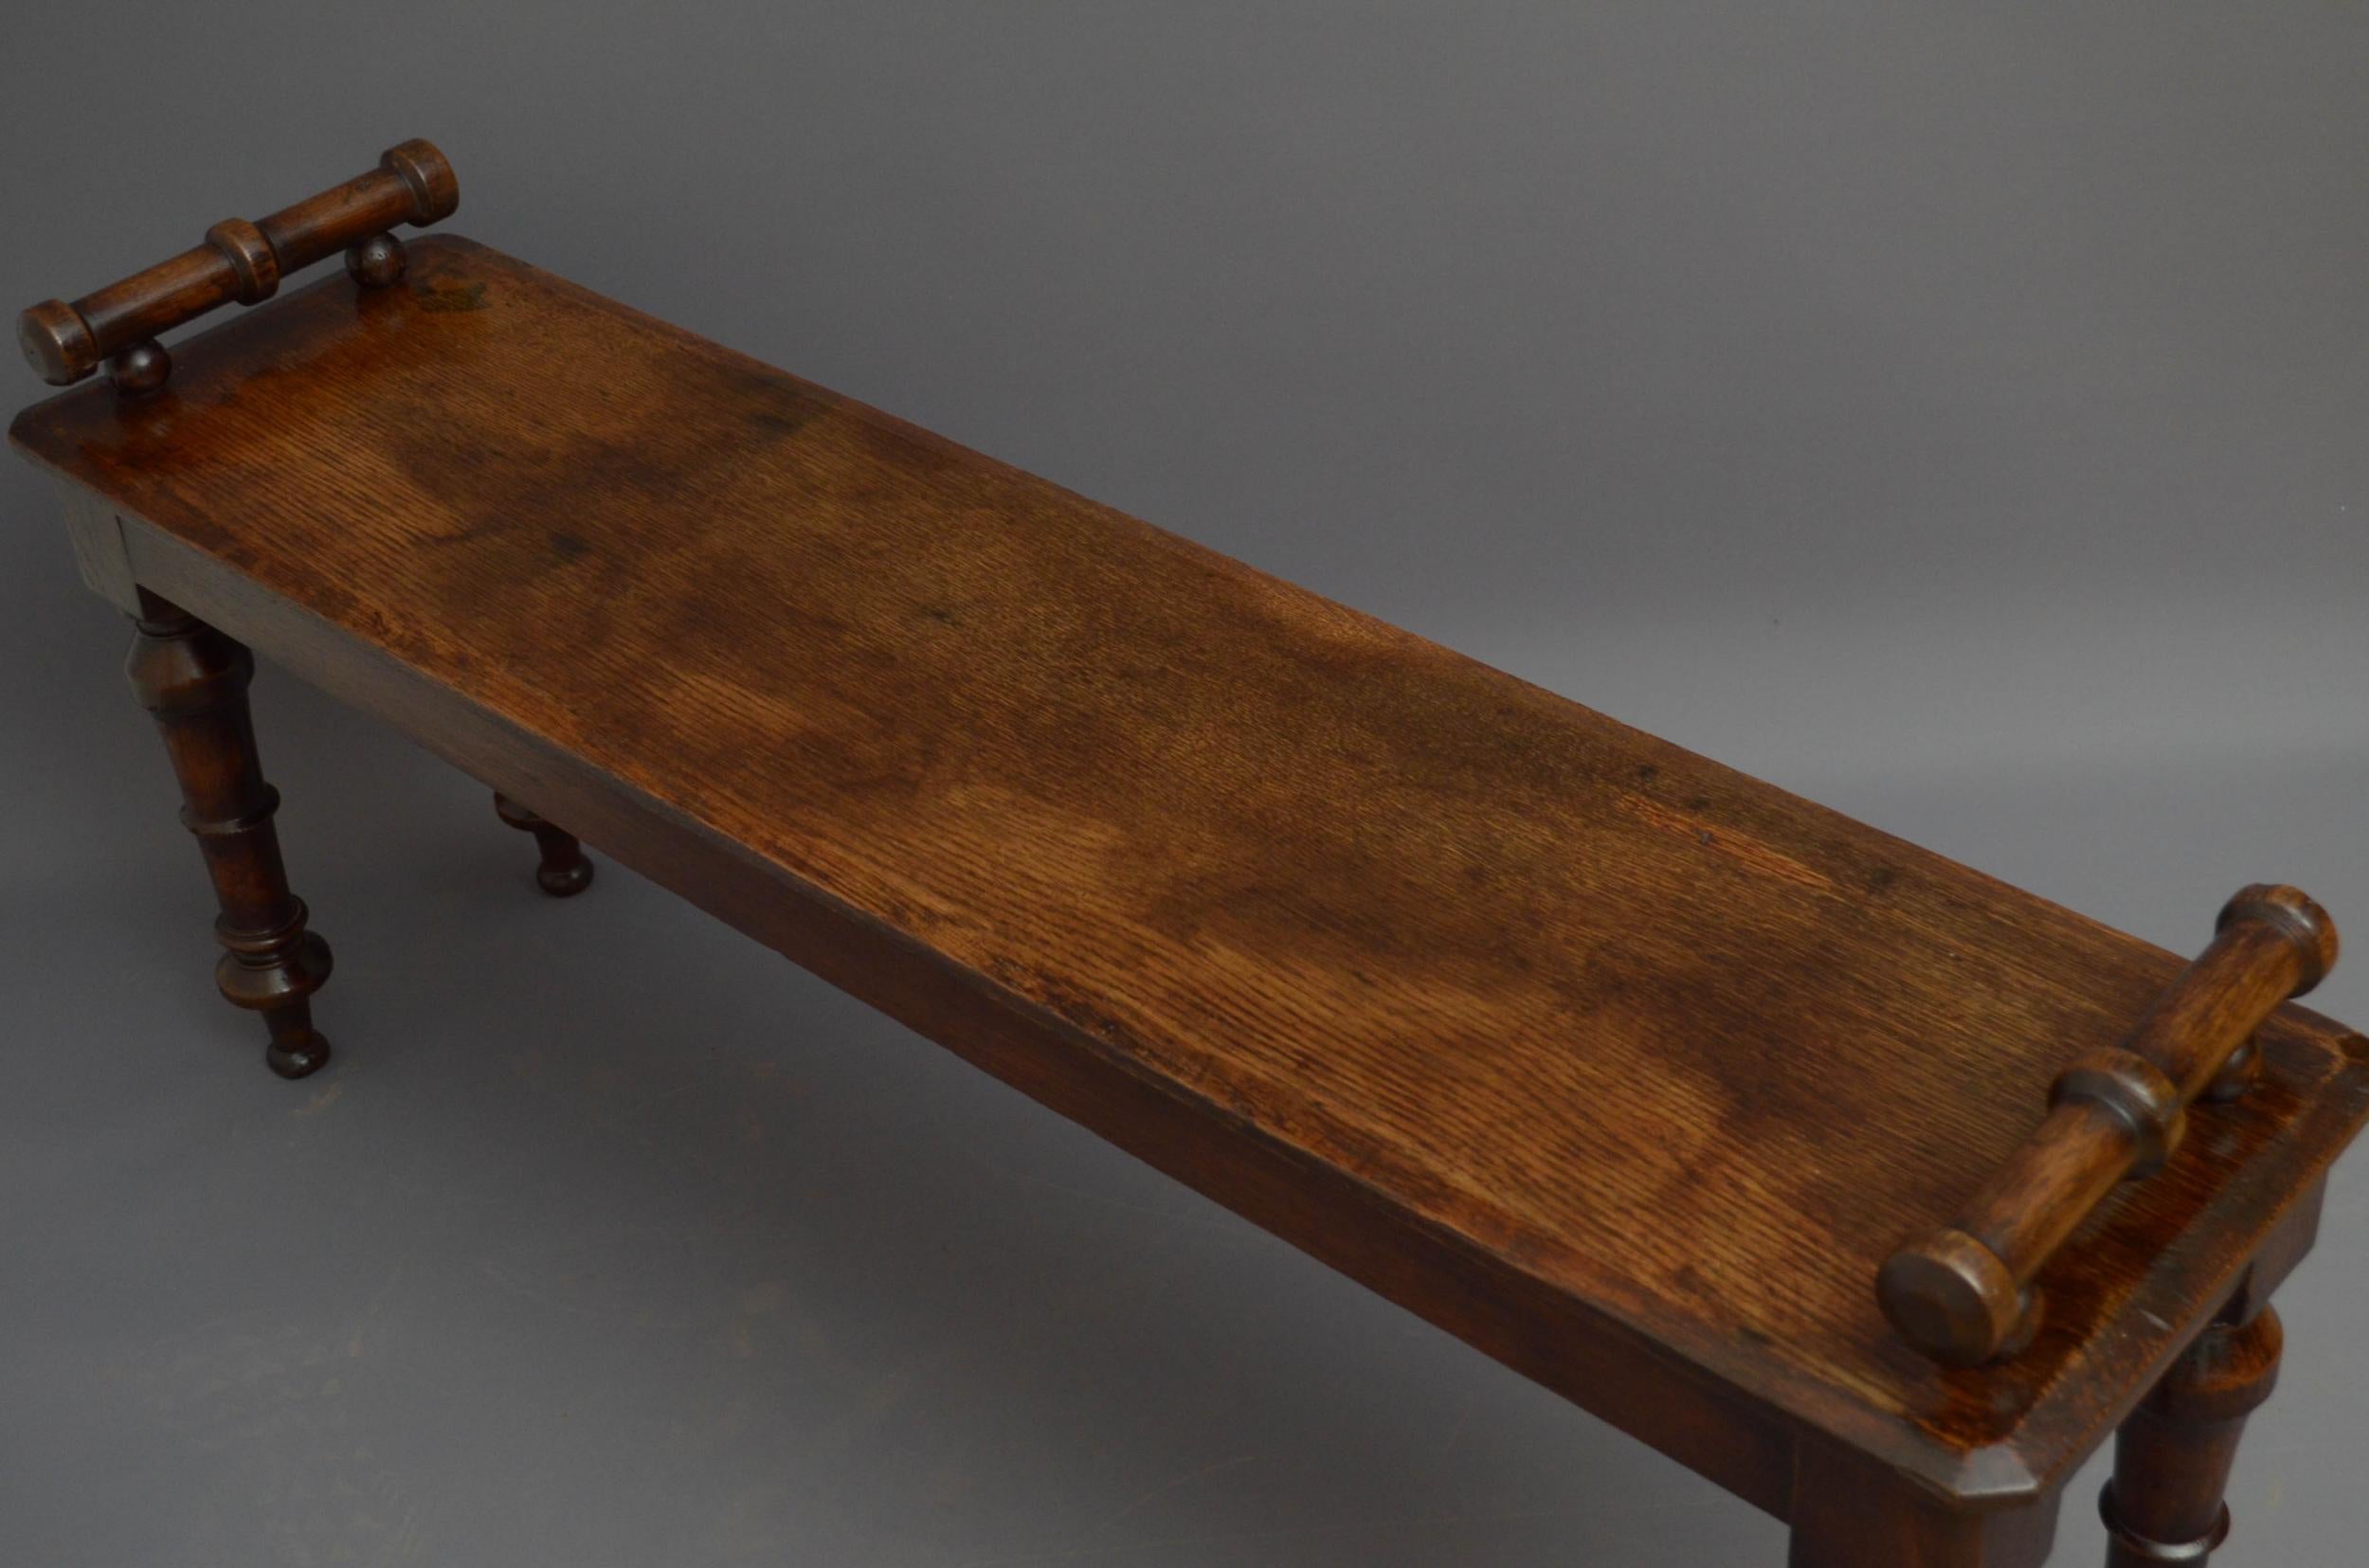 19th Century Gothic Revival Oak Hall Bench